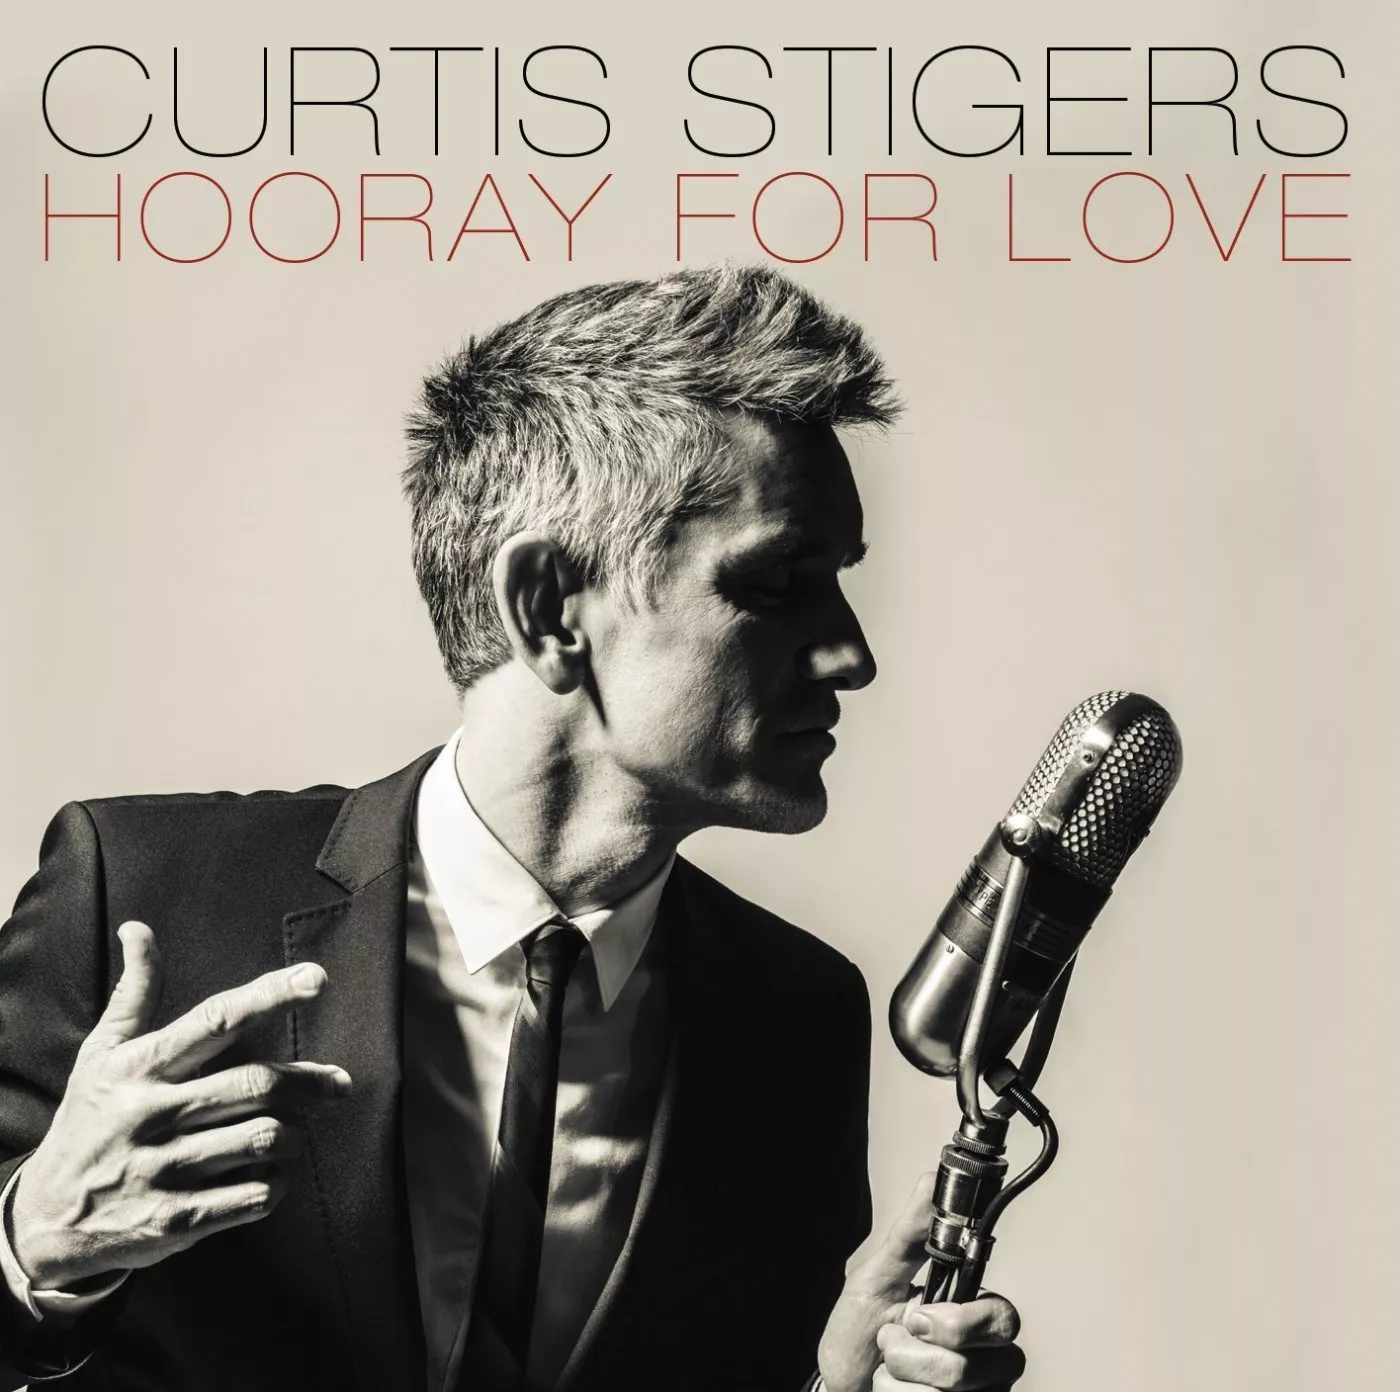 Hooray for Love - Curtis Stigers